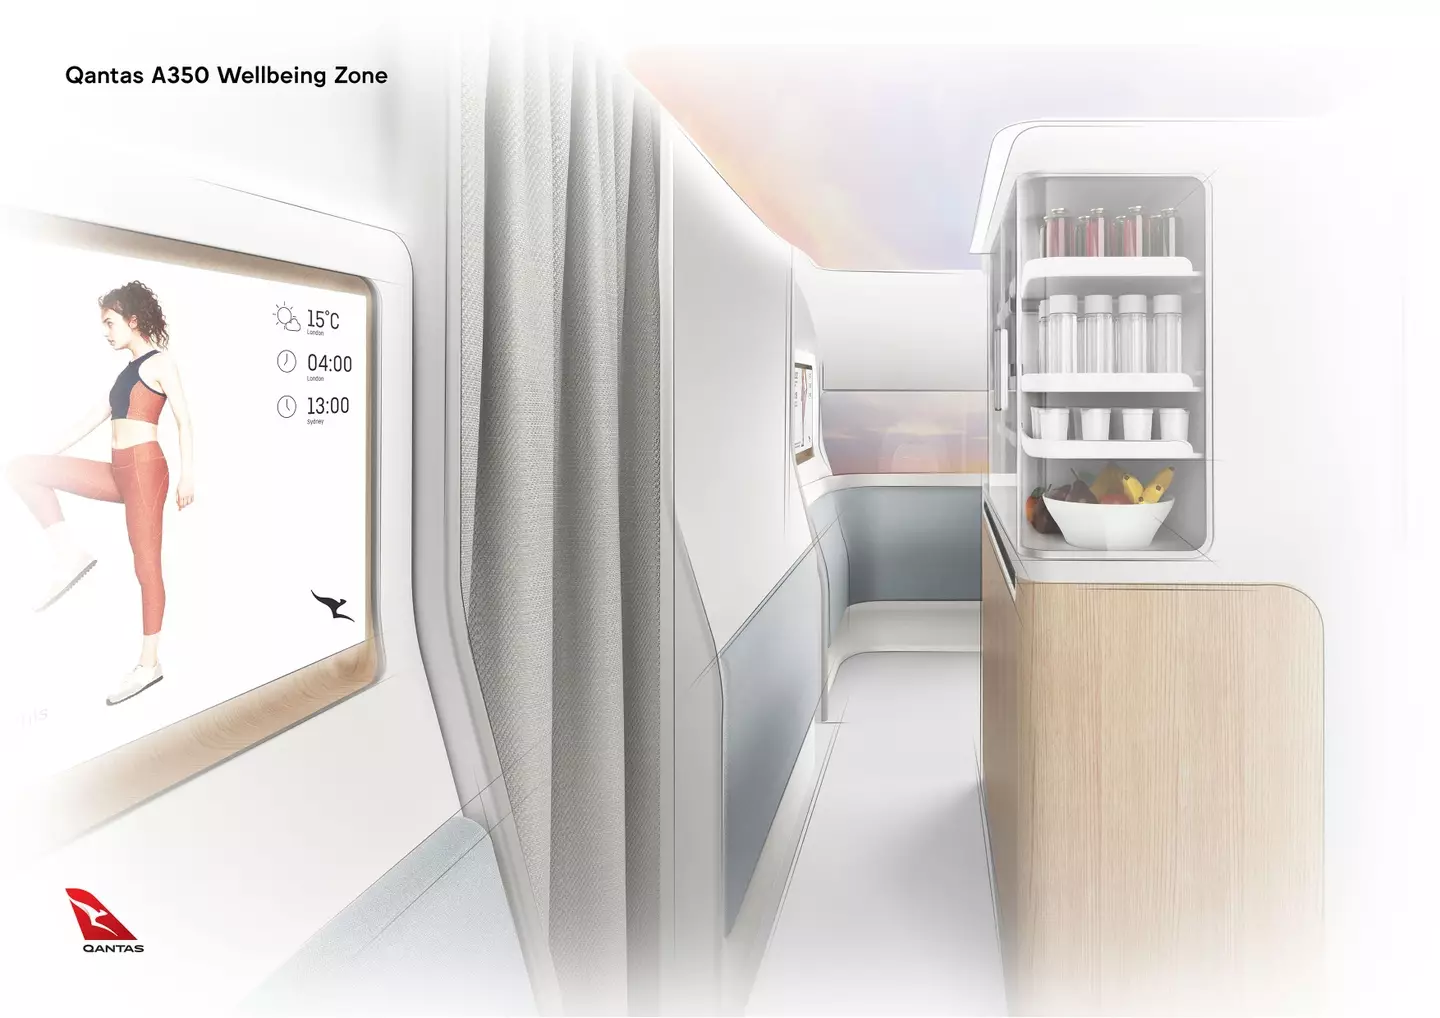 'Comfort zones' will allow passengers to stretch their legs